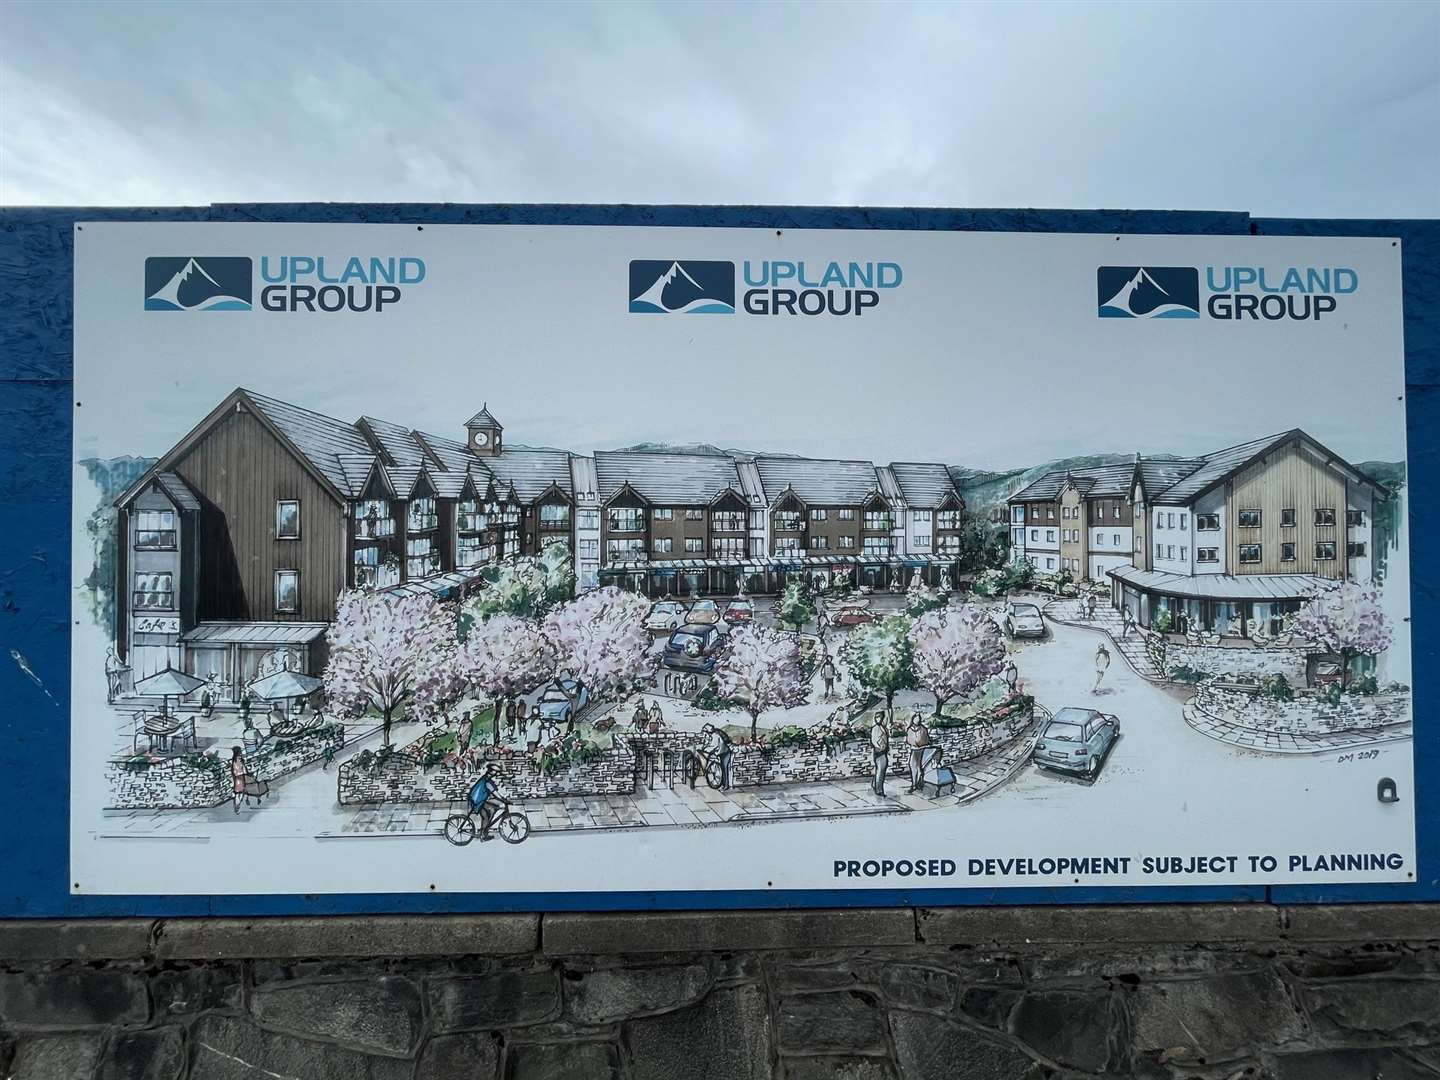 A sign showing off a now revised plan for the development.